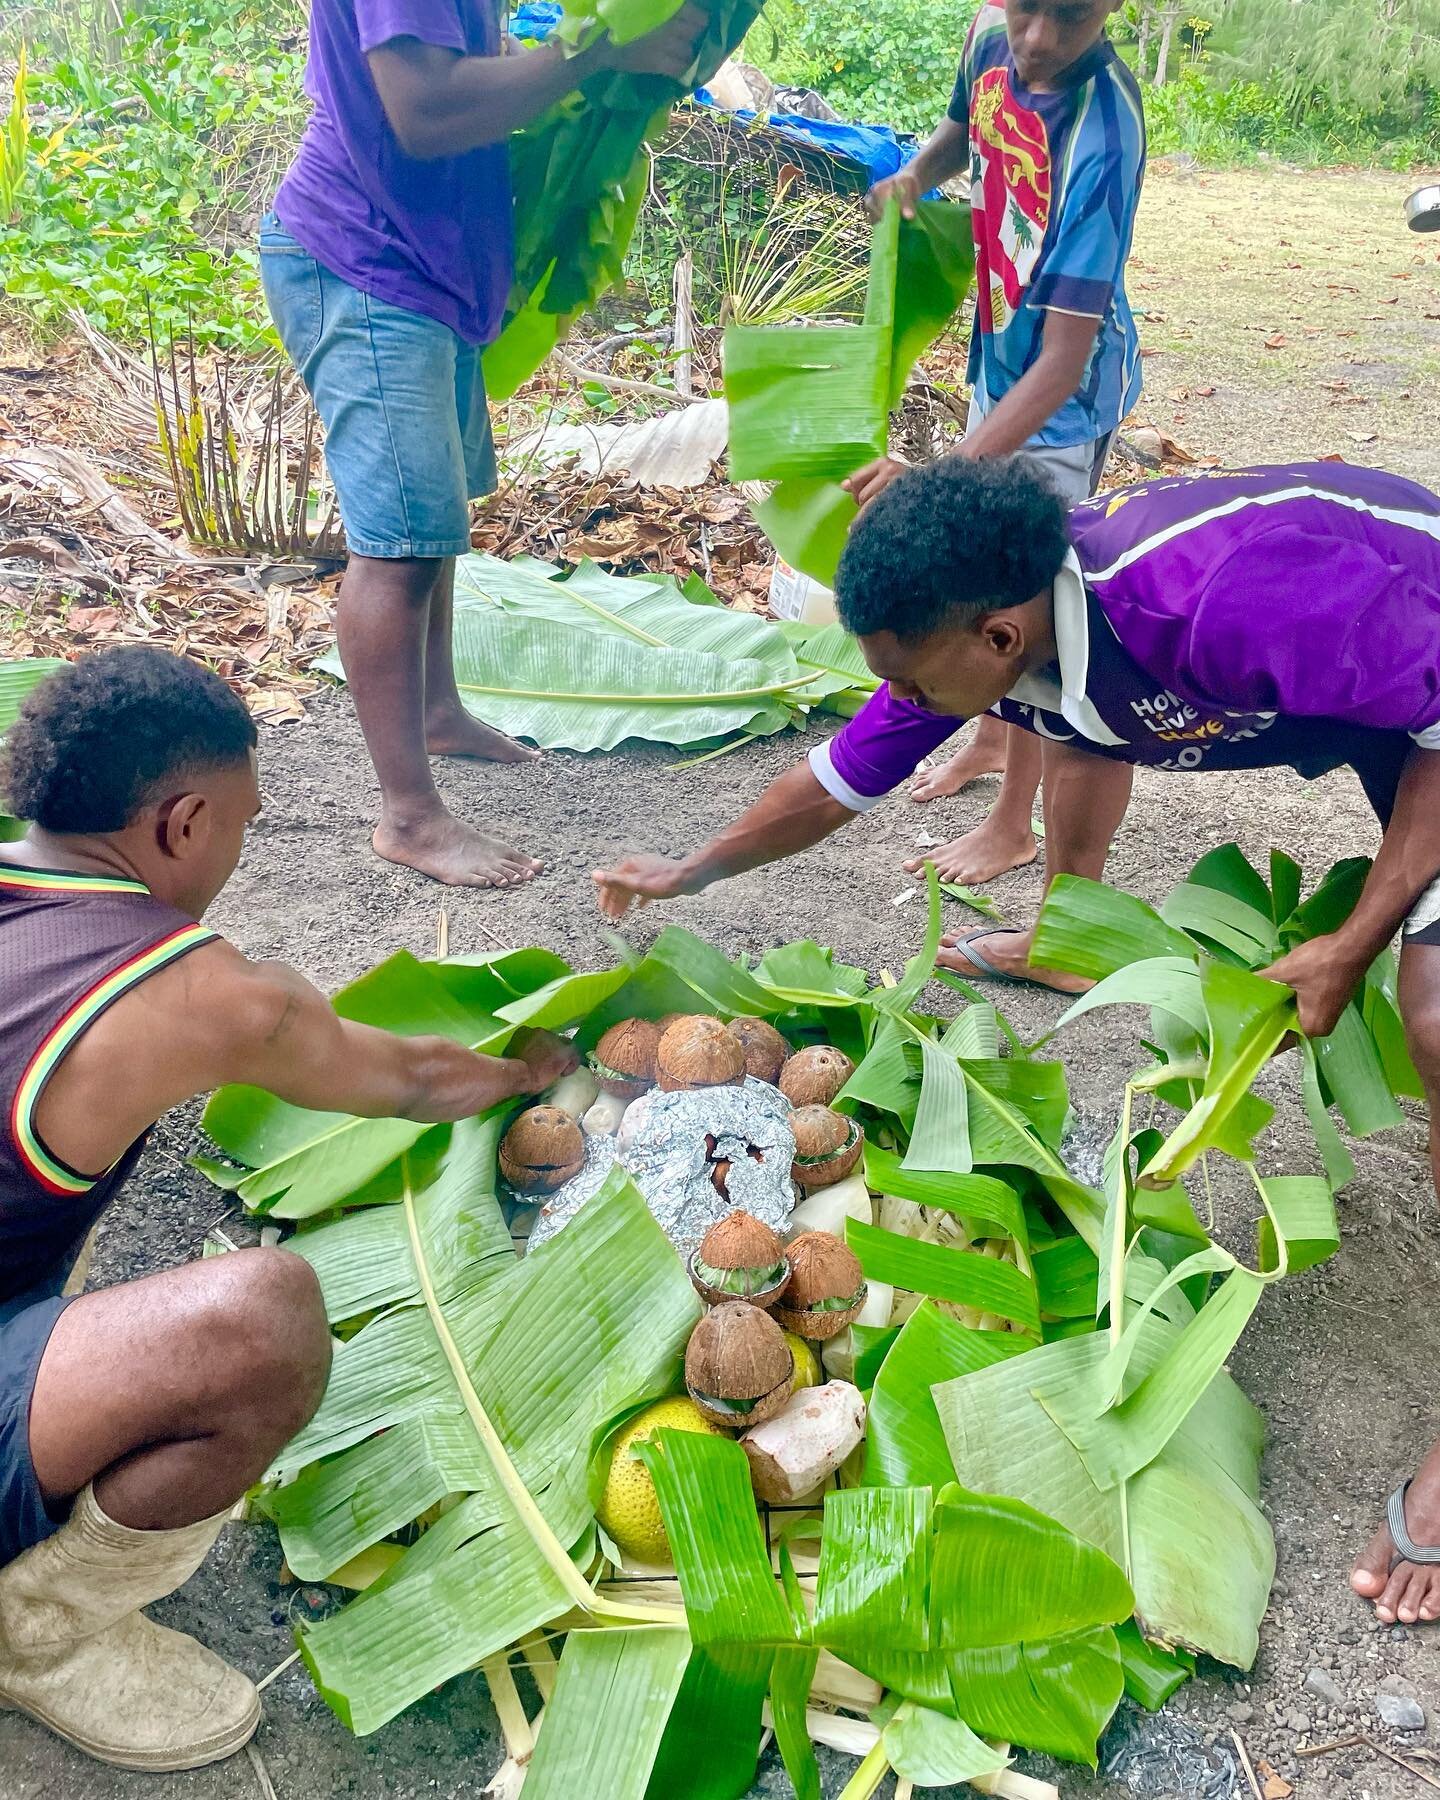 Lovo. Underground Oven. Amazing to be a part of this special occasion. Moji and Toki fire masters. 🔥 🔥🔥

#lovo #fiji #undergroundoven #fijiancooking #southpacific #yasawaislands #homestead #fijianfamily